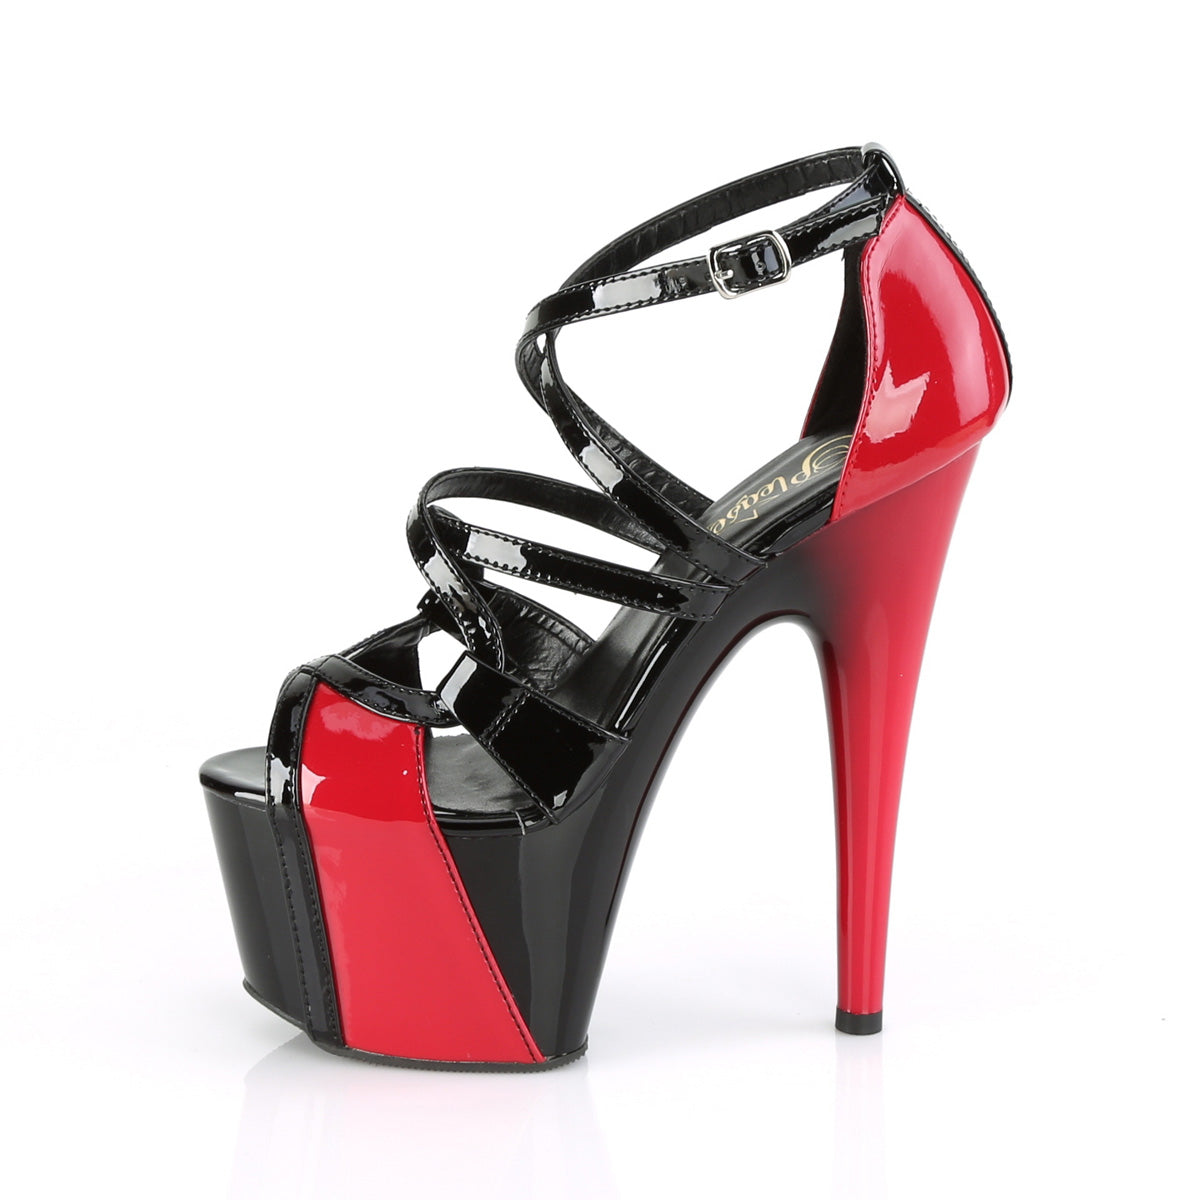 ADORE-764 Pleaser 7" Heel Black and Red Strippers Sandals-Pleaser- Sexy Shoes Pole Dance Heels